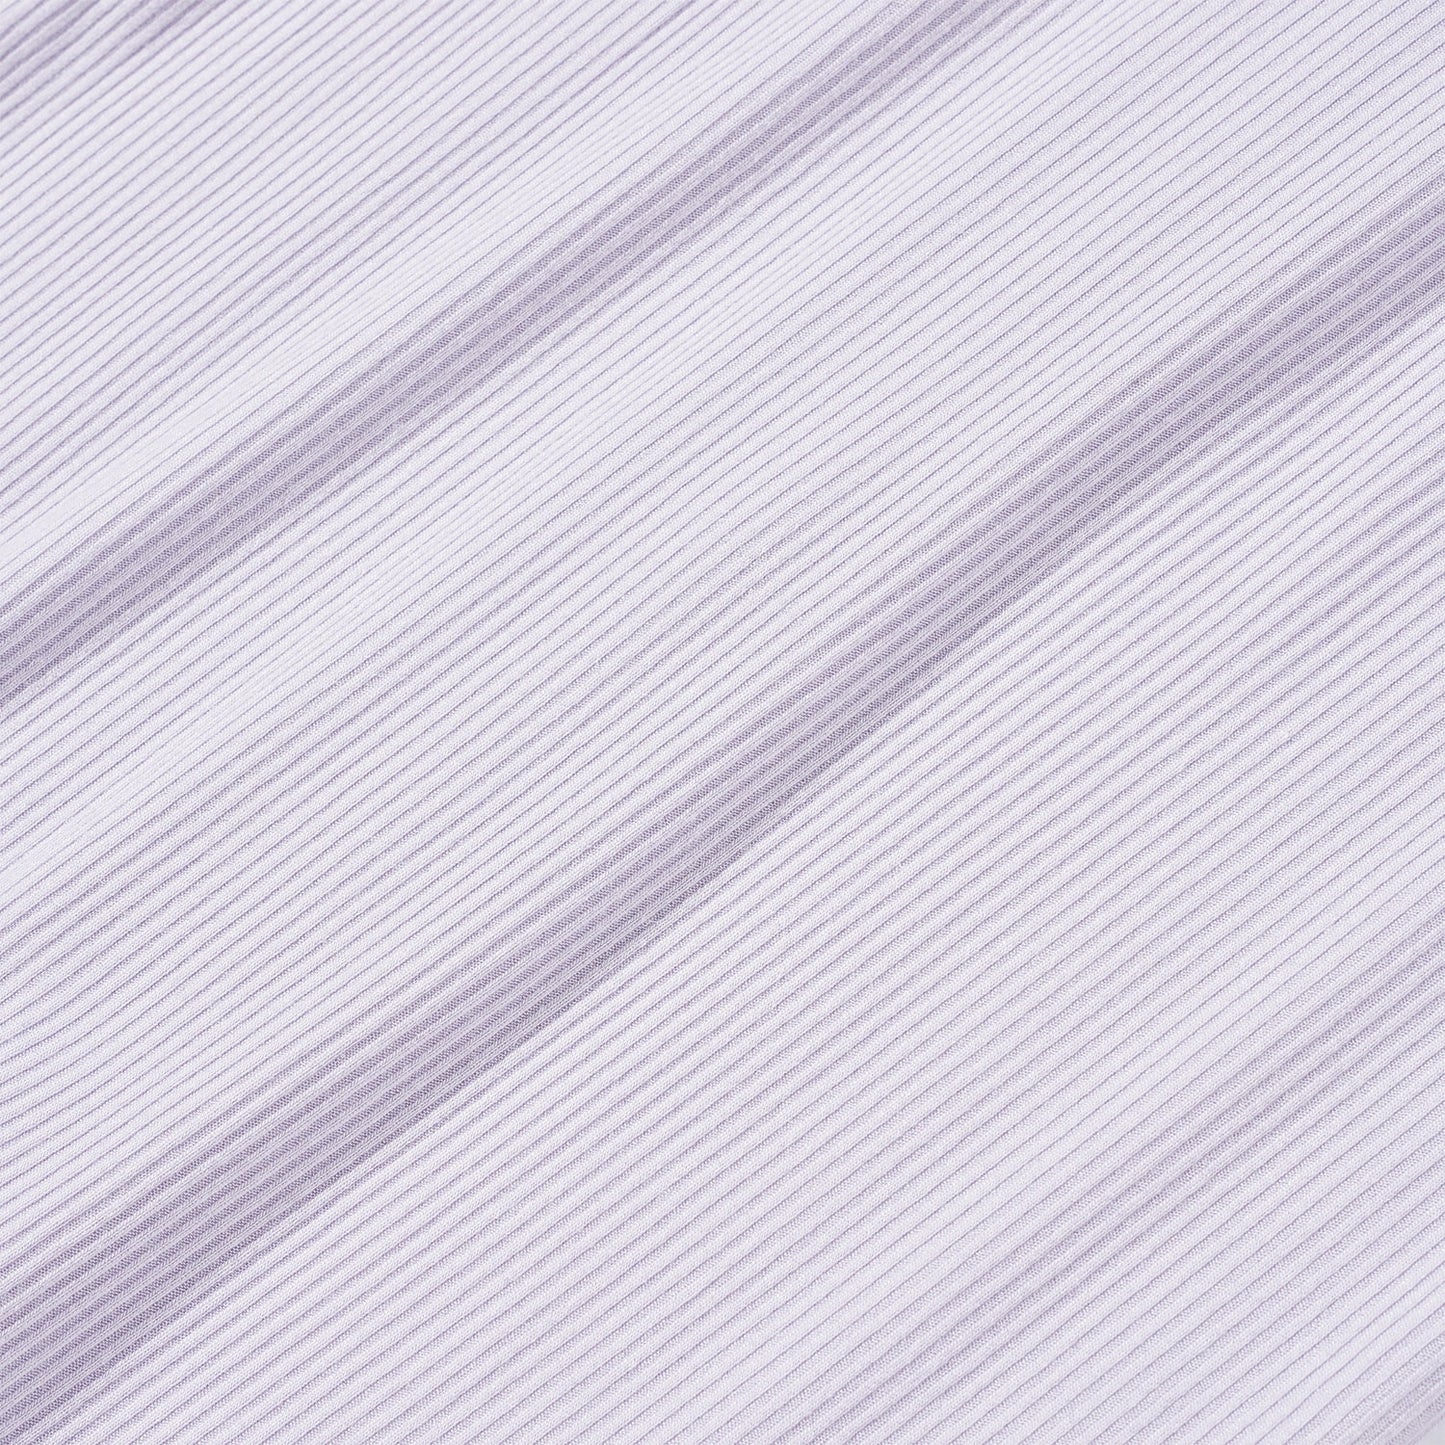 Lilac Small Ribbed Swaddle Set